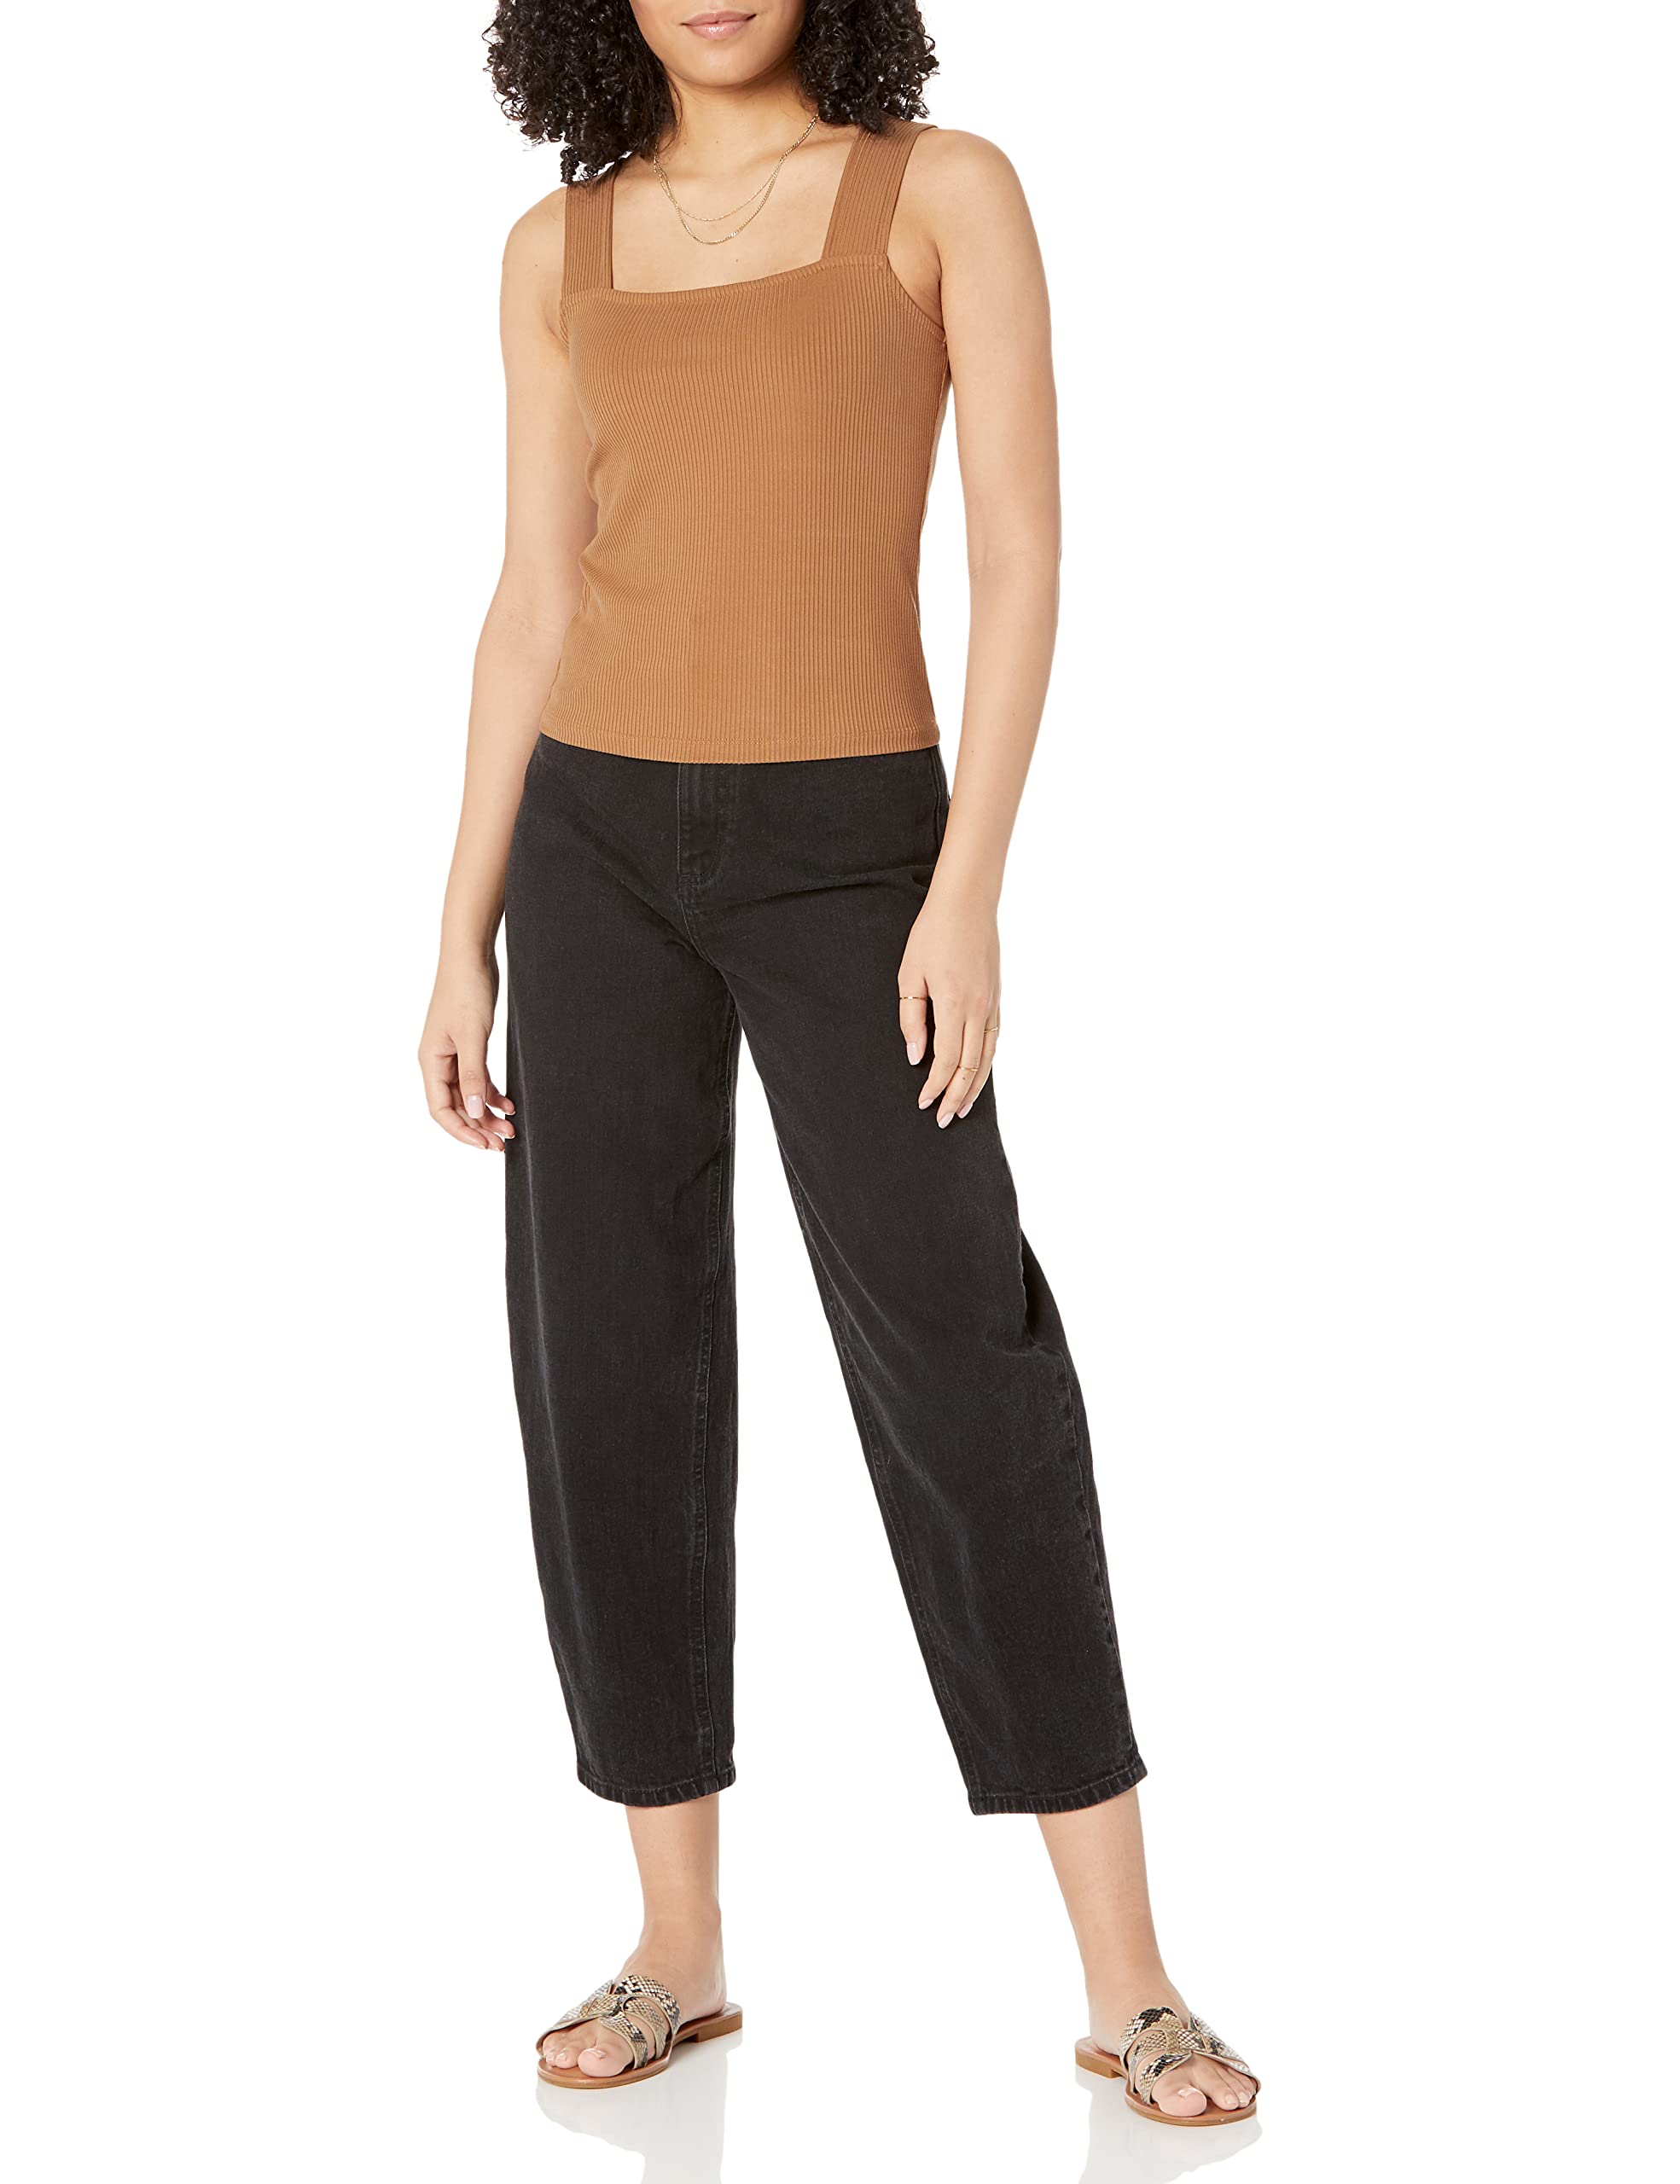 The Drop Women's Jody Square-Neck Cropped Fitted Rib Knit Tank Top